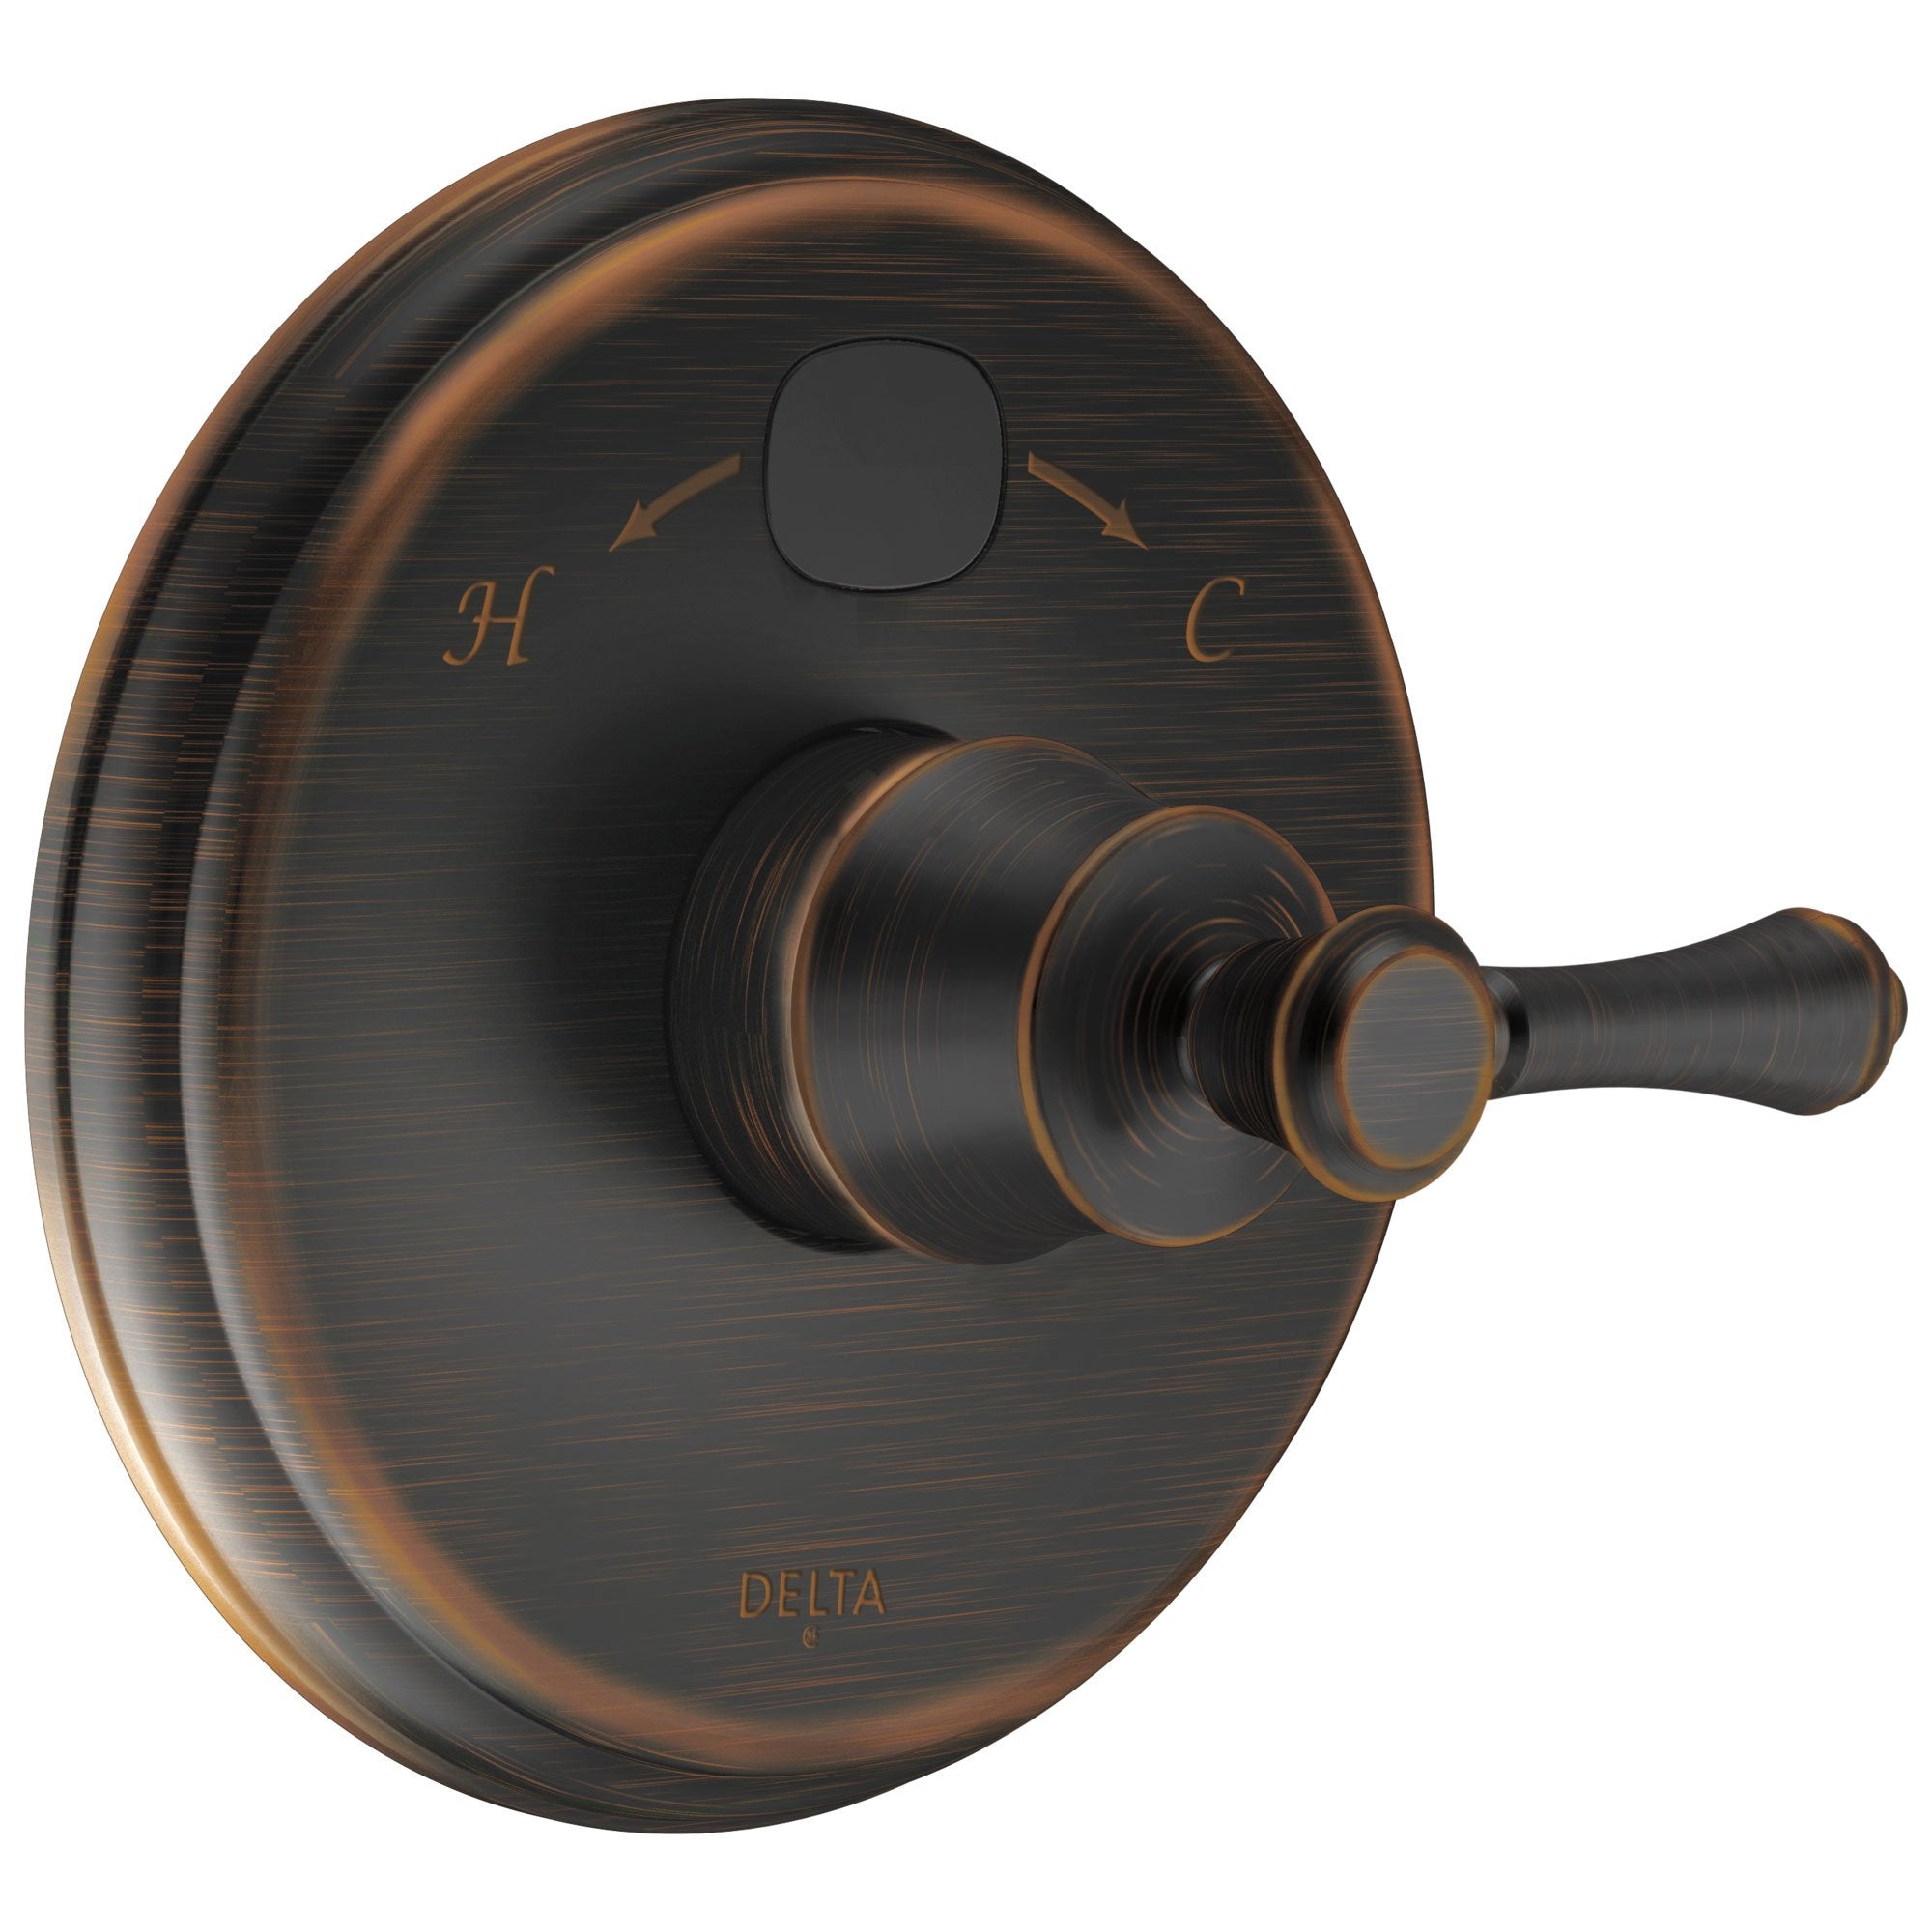 Delta Venetian Bronze Cassidy Collection 14 Series Digital Display Temp2O Shower Valve Control COMPLETE with Single Lever Handle and Valve without Stops D1669V